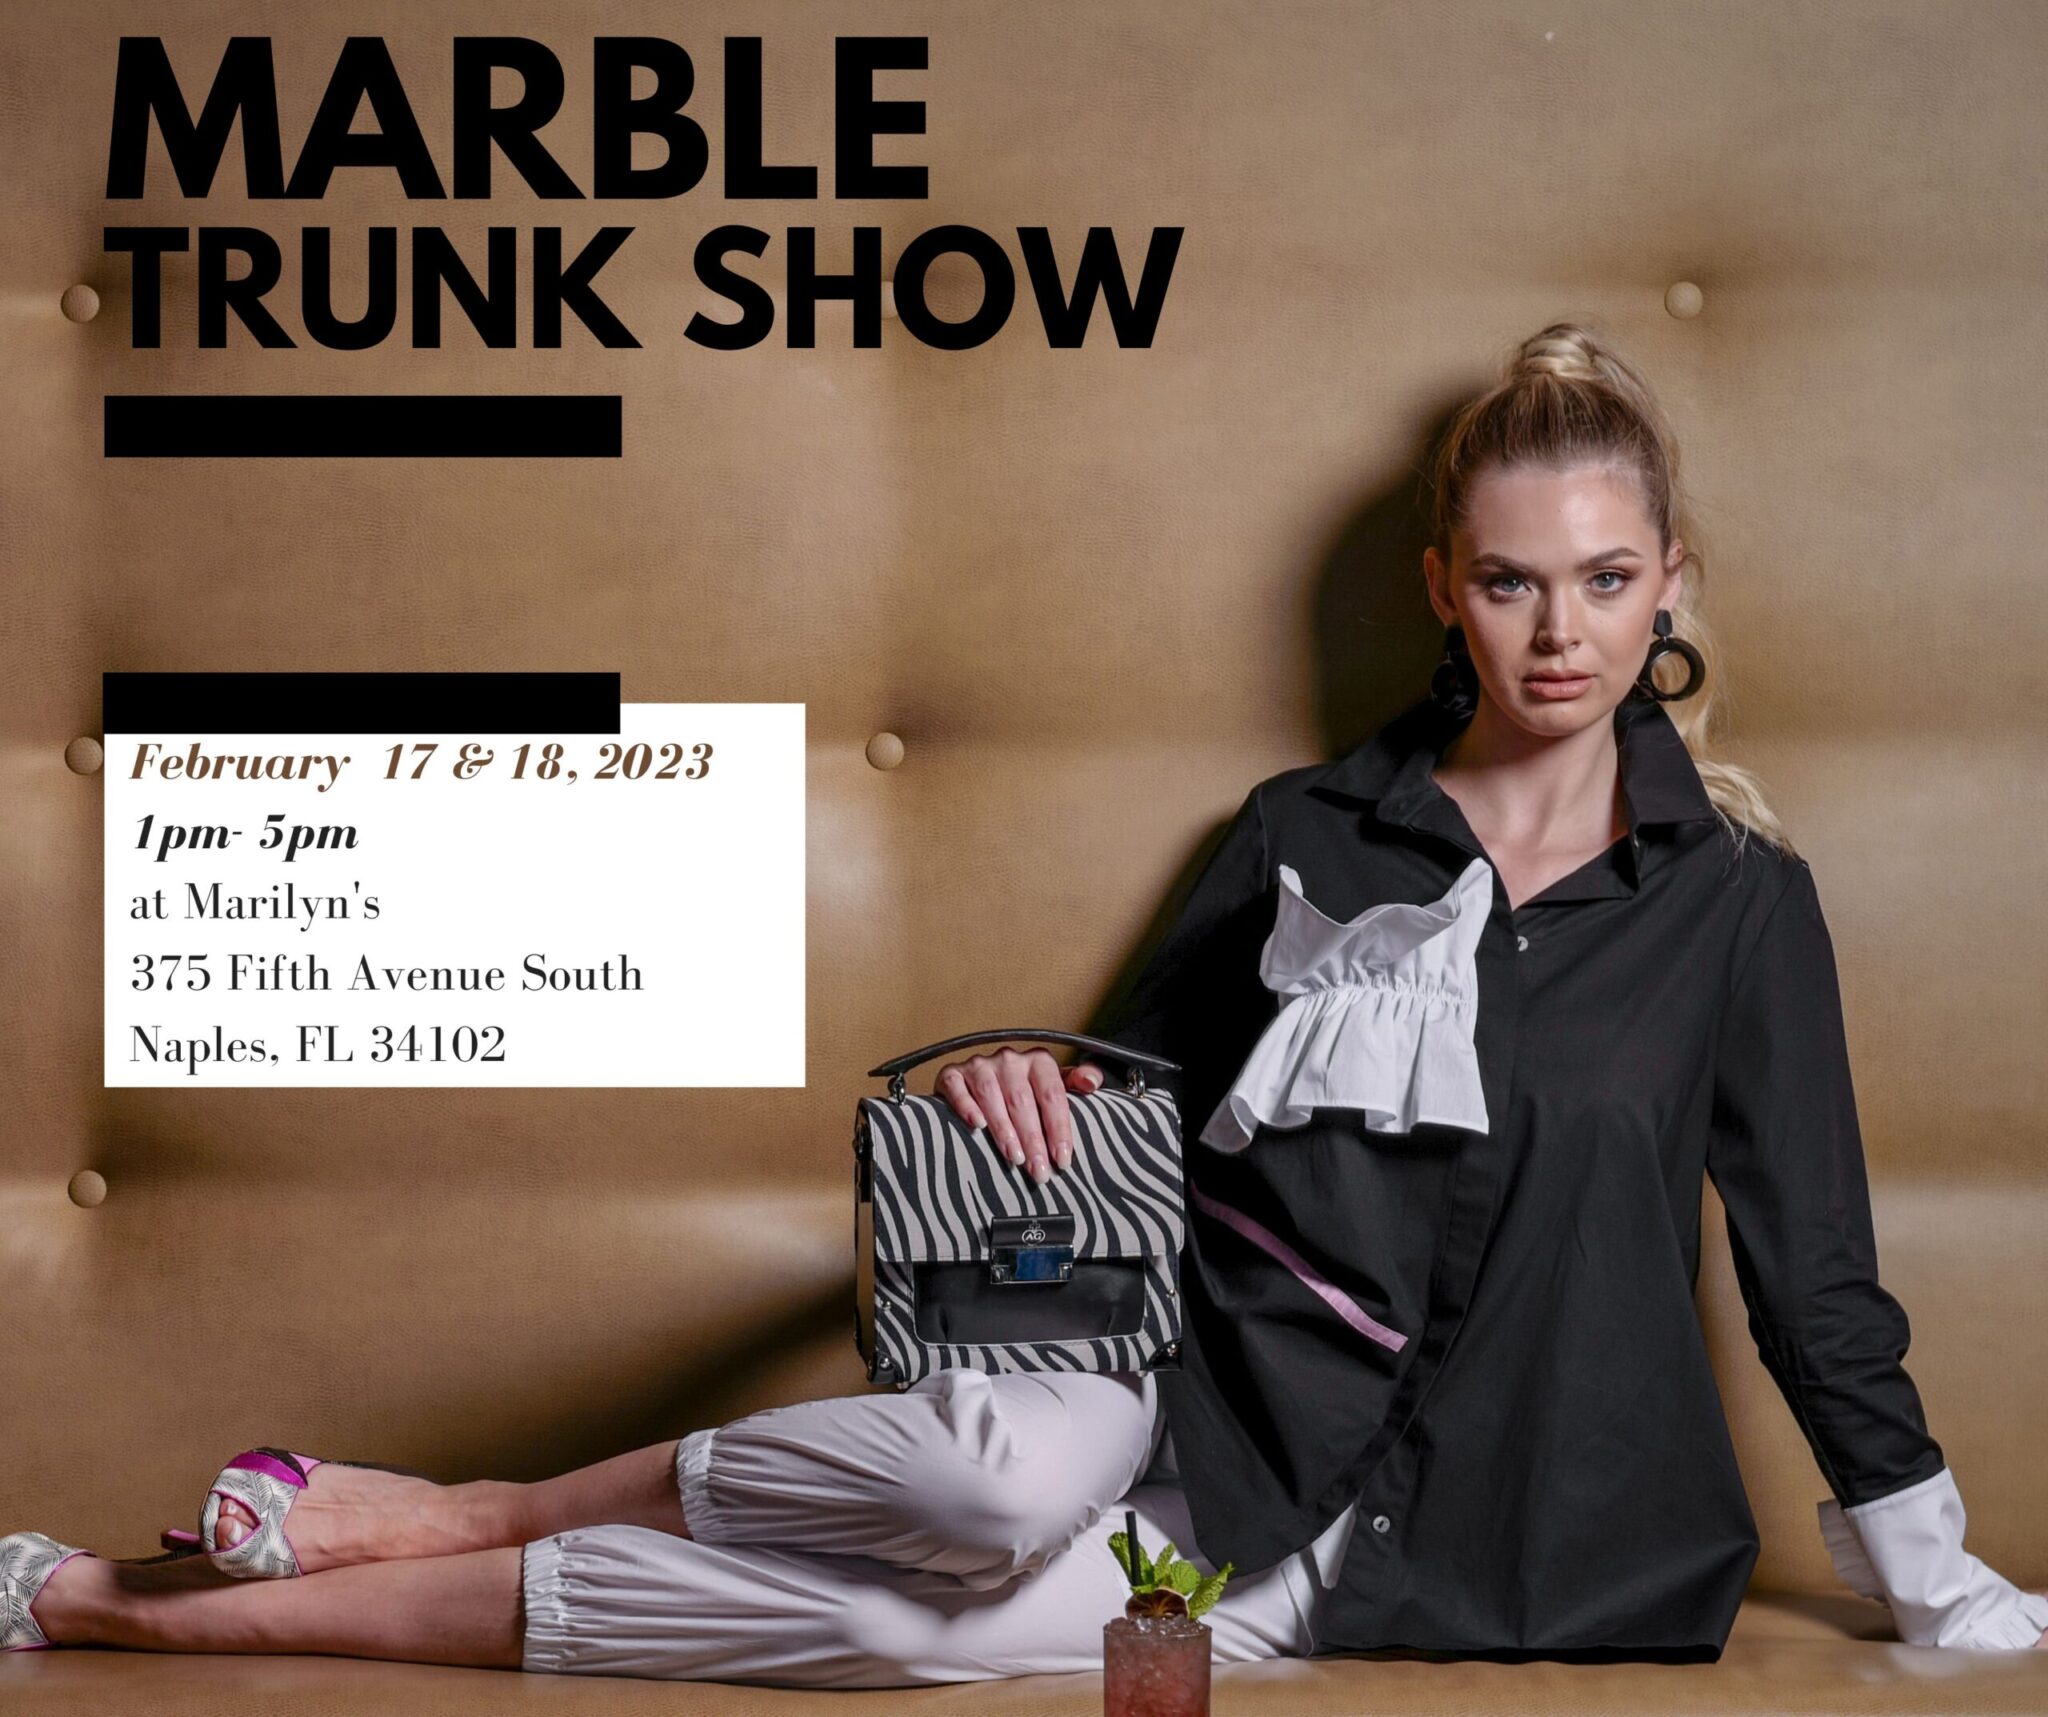 Marble Trunk Show- February 17 & 18